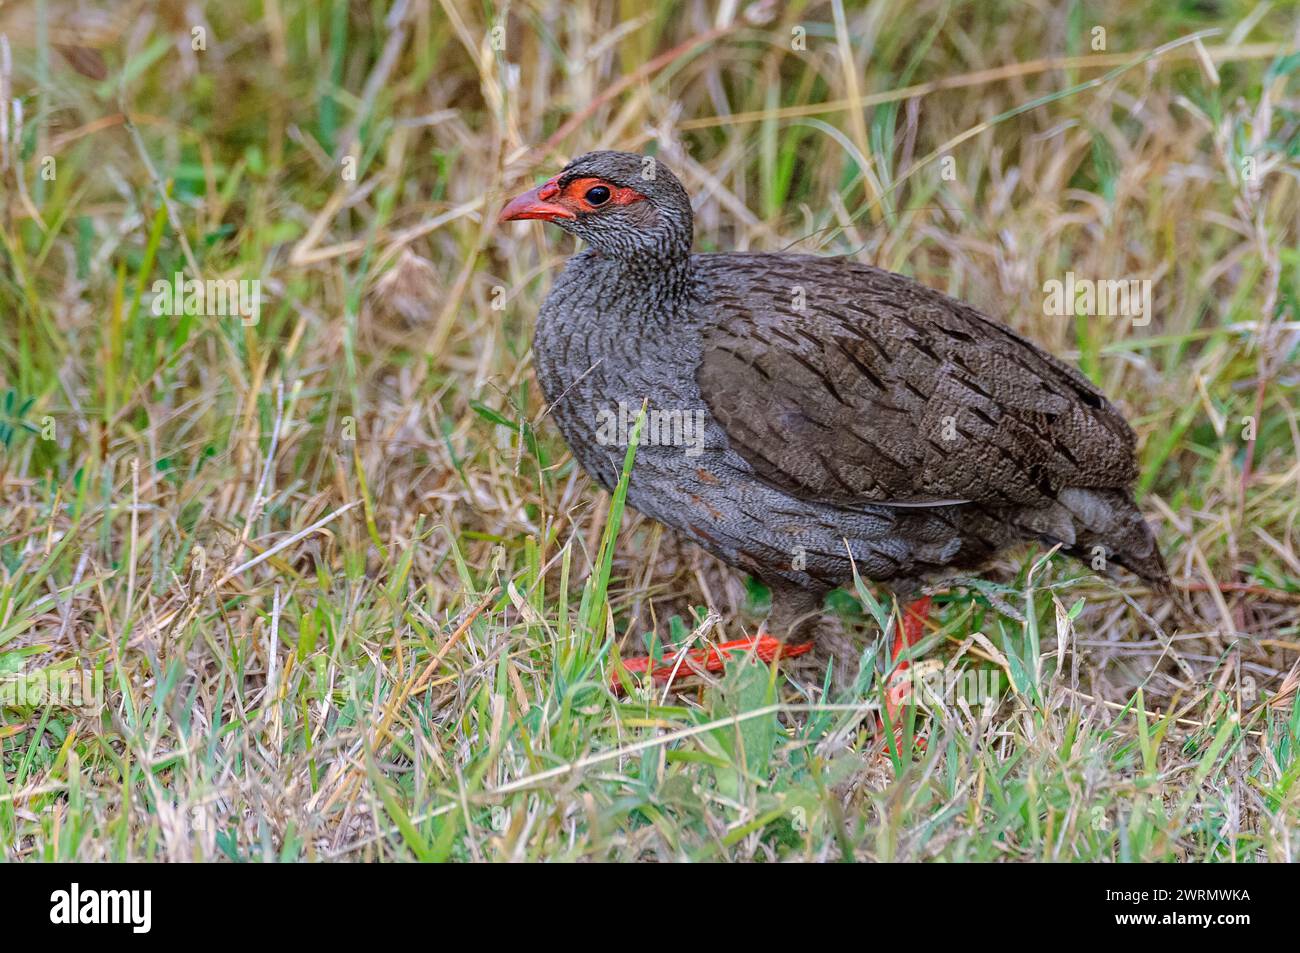 Red-necked spurfowl (Pternistis afer) from Maasai Mara, Kenya. Stock Photo